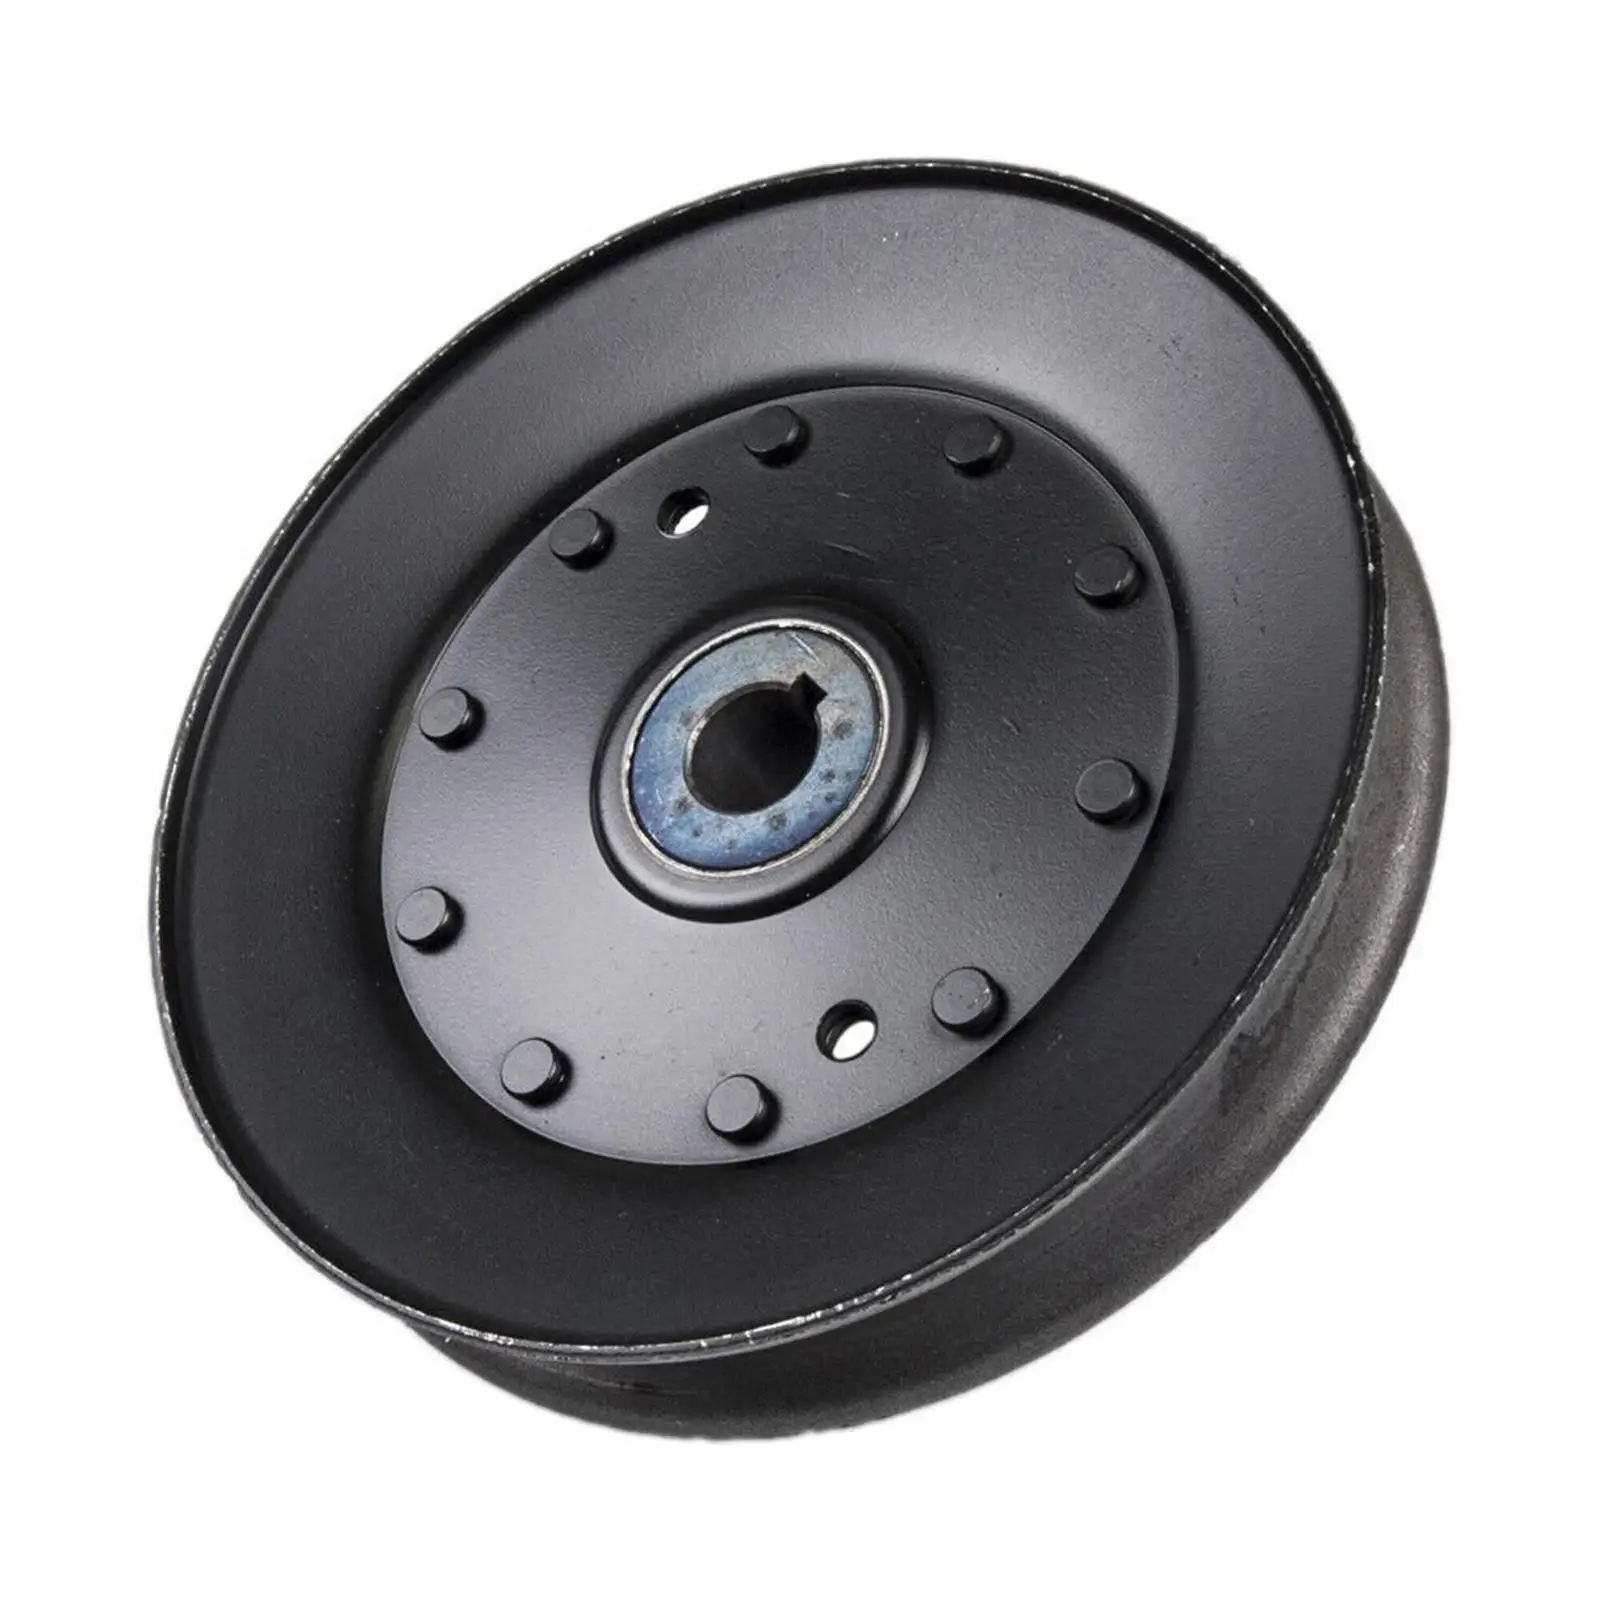 Idler Drive Pulley Accessories Metal Repair AM104405 for Lawn Tractors L1742 L100 D100 Fine Surface Processing Easy to Install